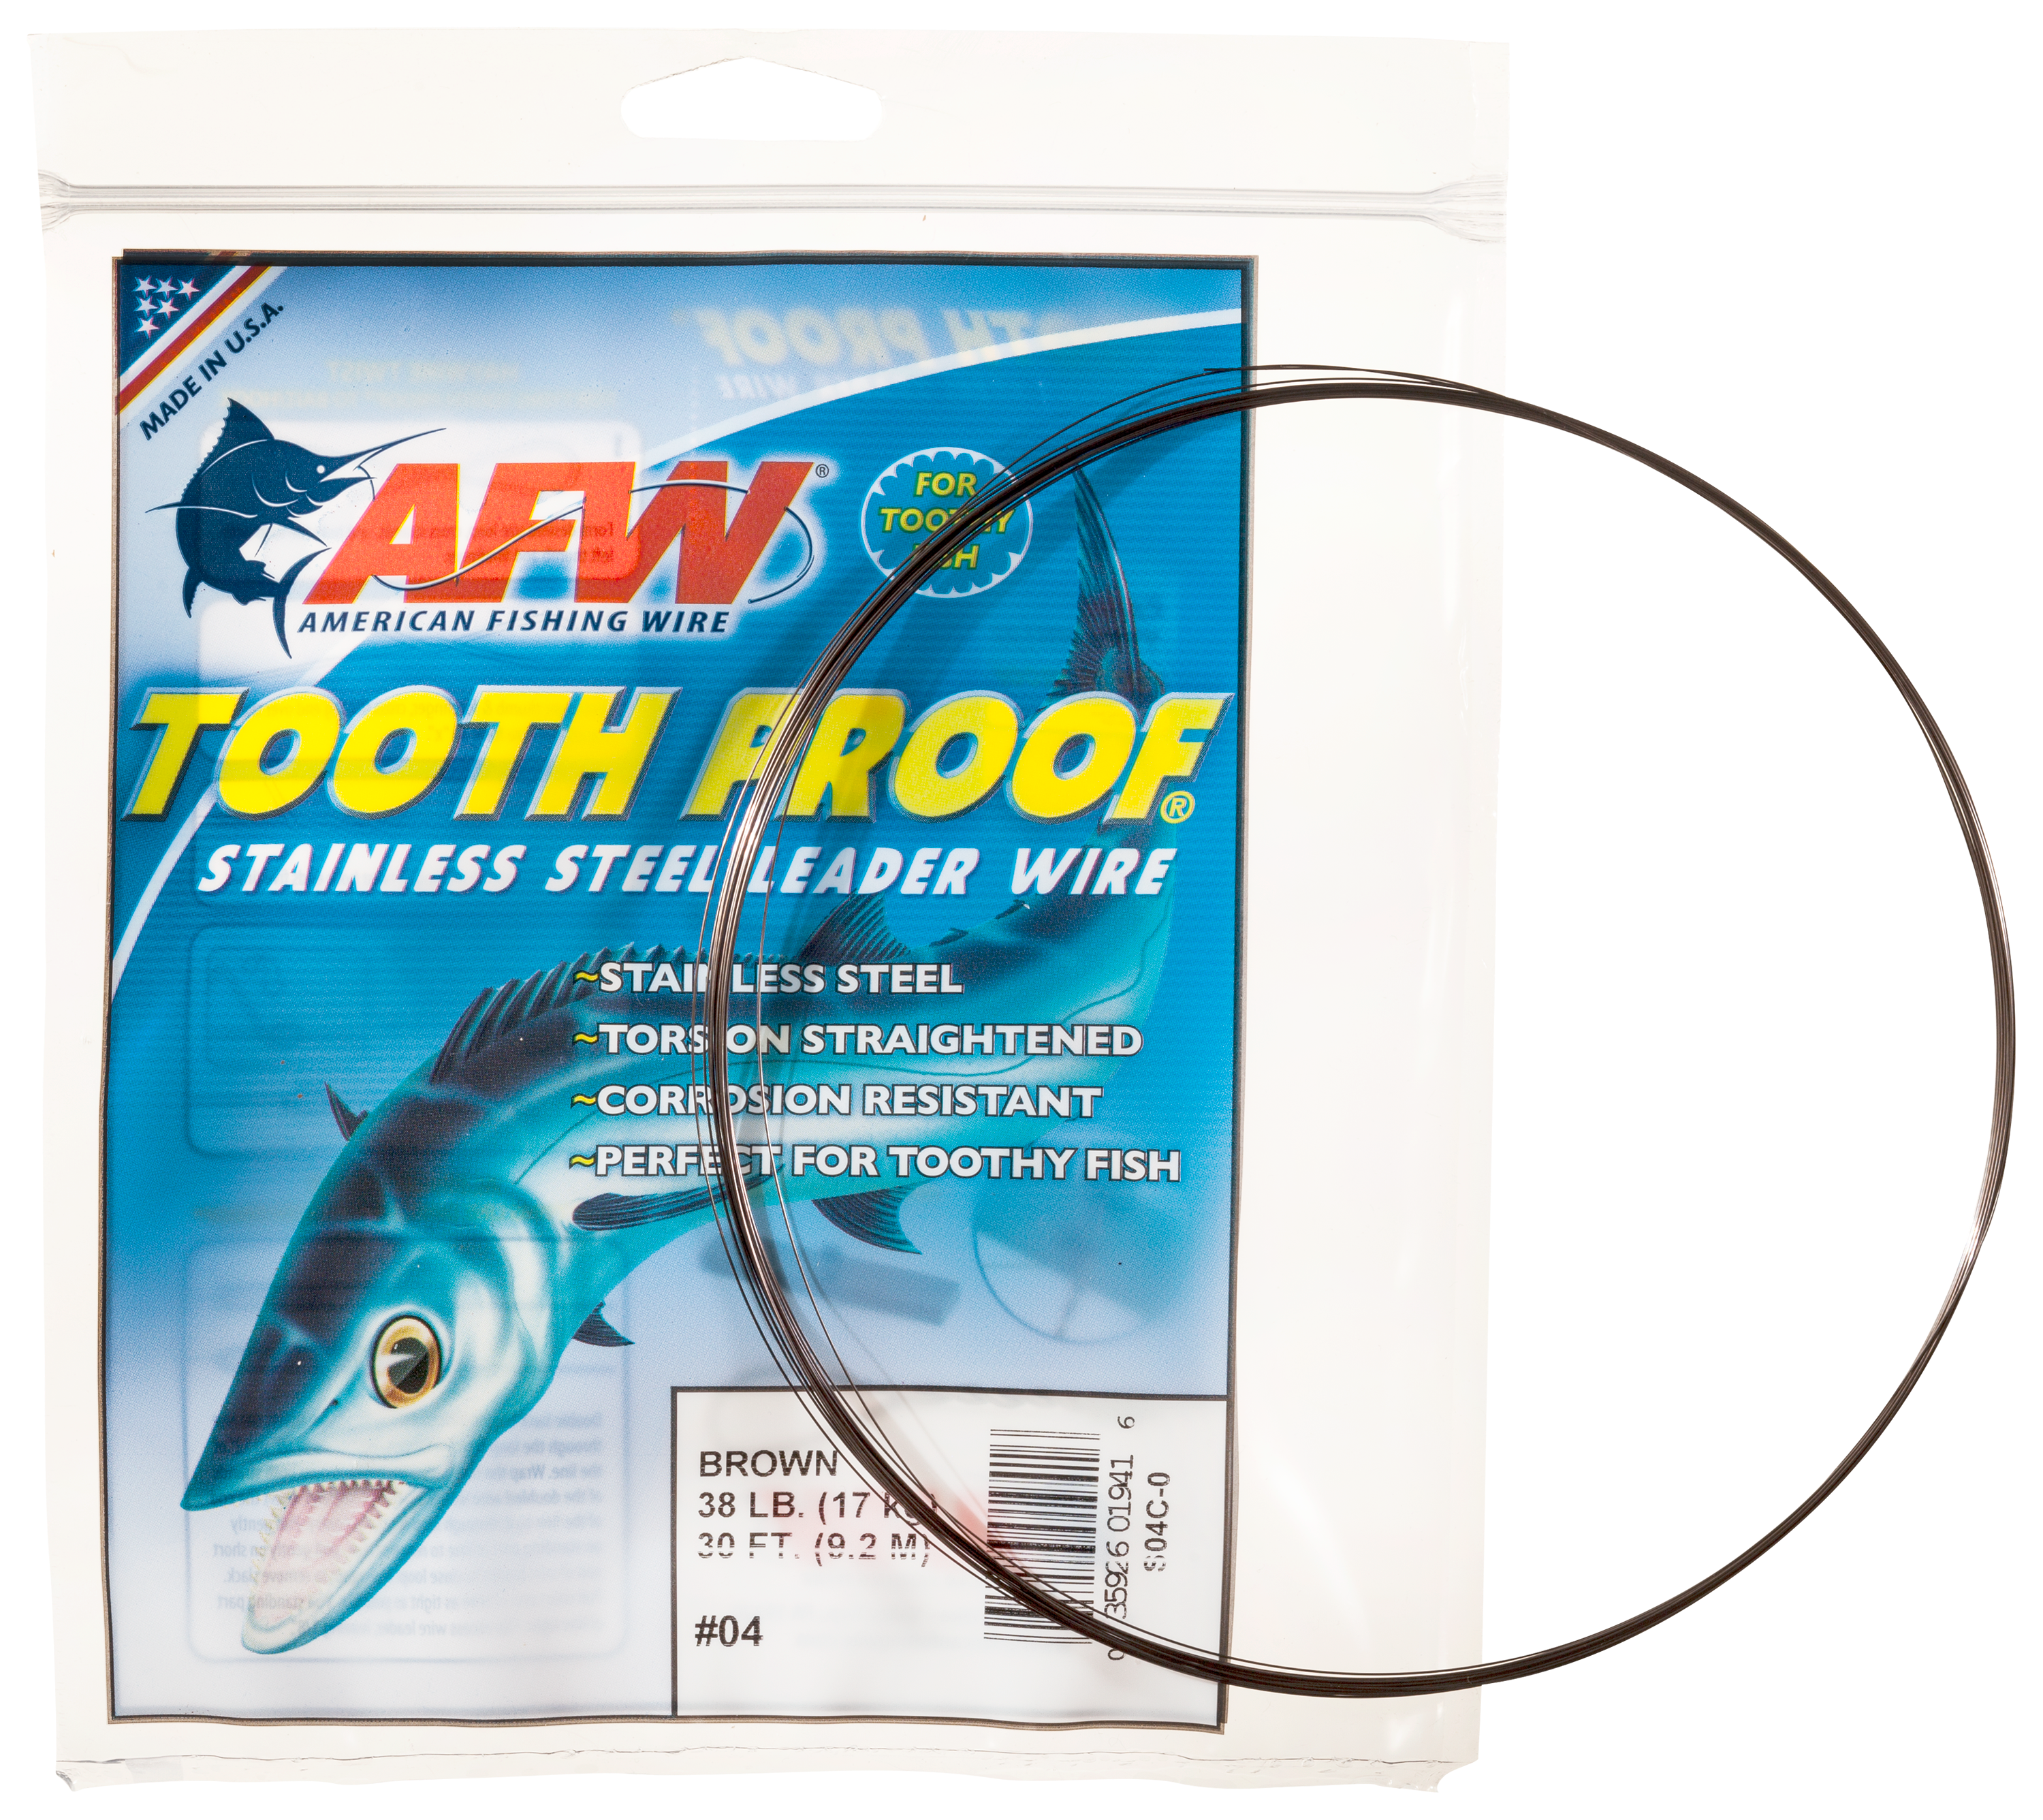 AFW Tooth Proof Stainless Steel Leader Single Strand Wire 124lb Test 30ft Bright